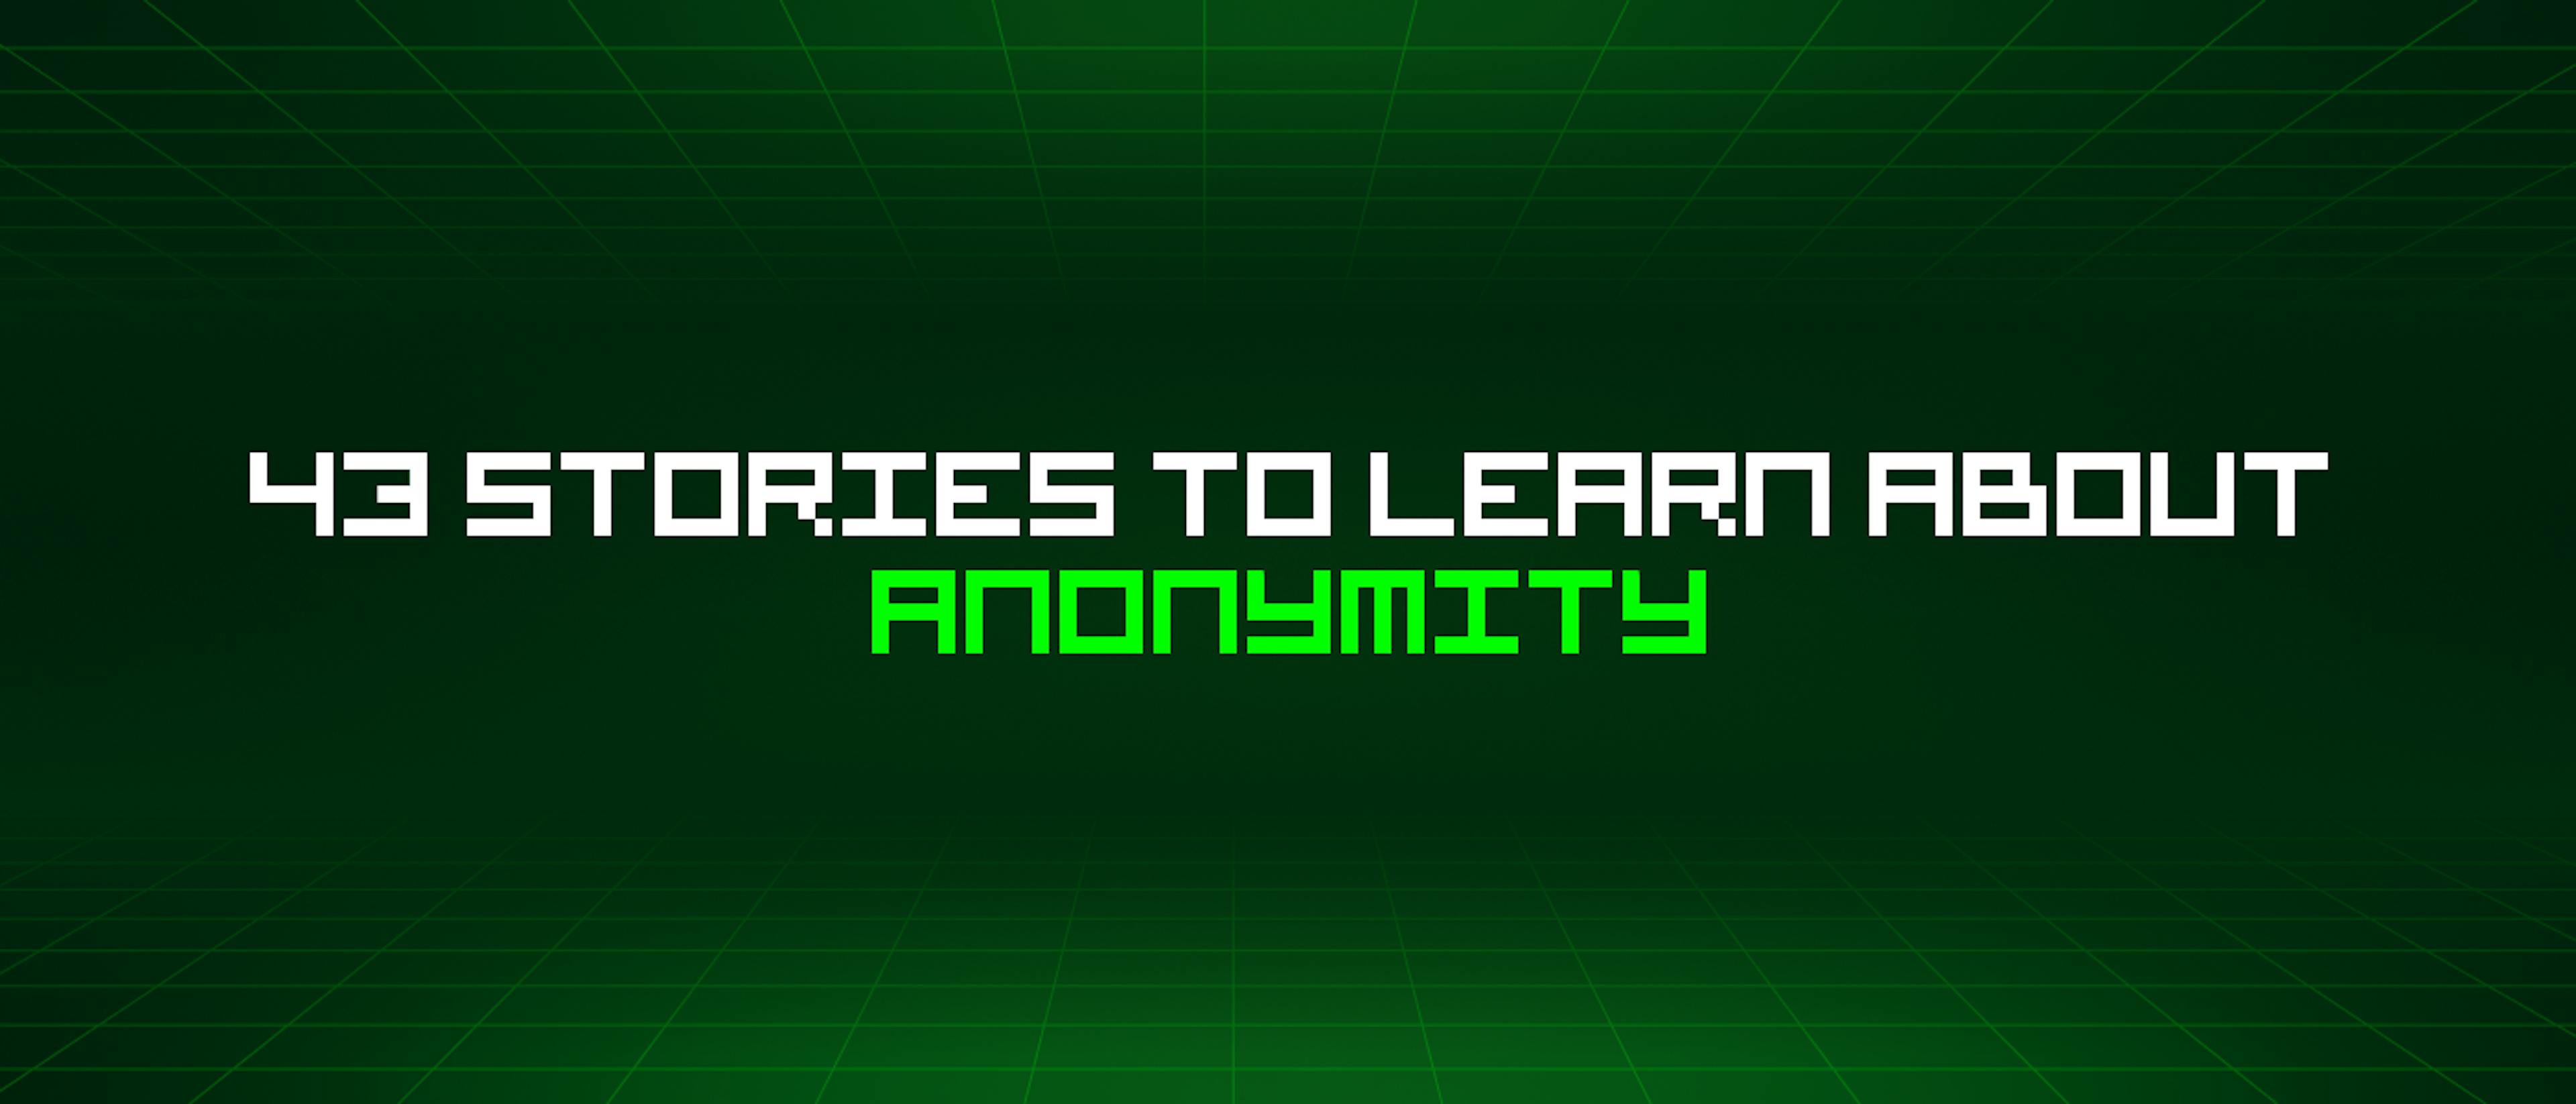 featured image - 43 Stories To Learn About Anonymity